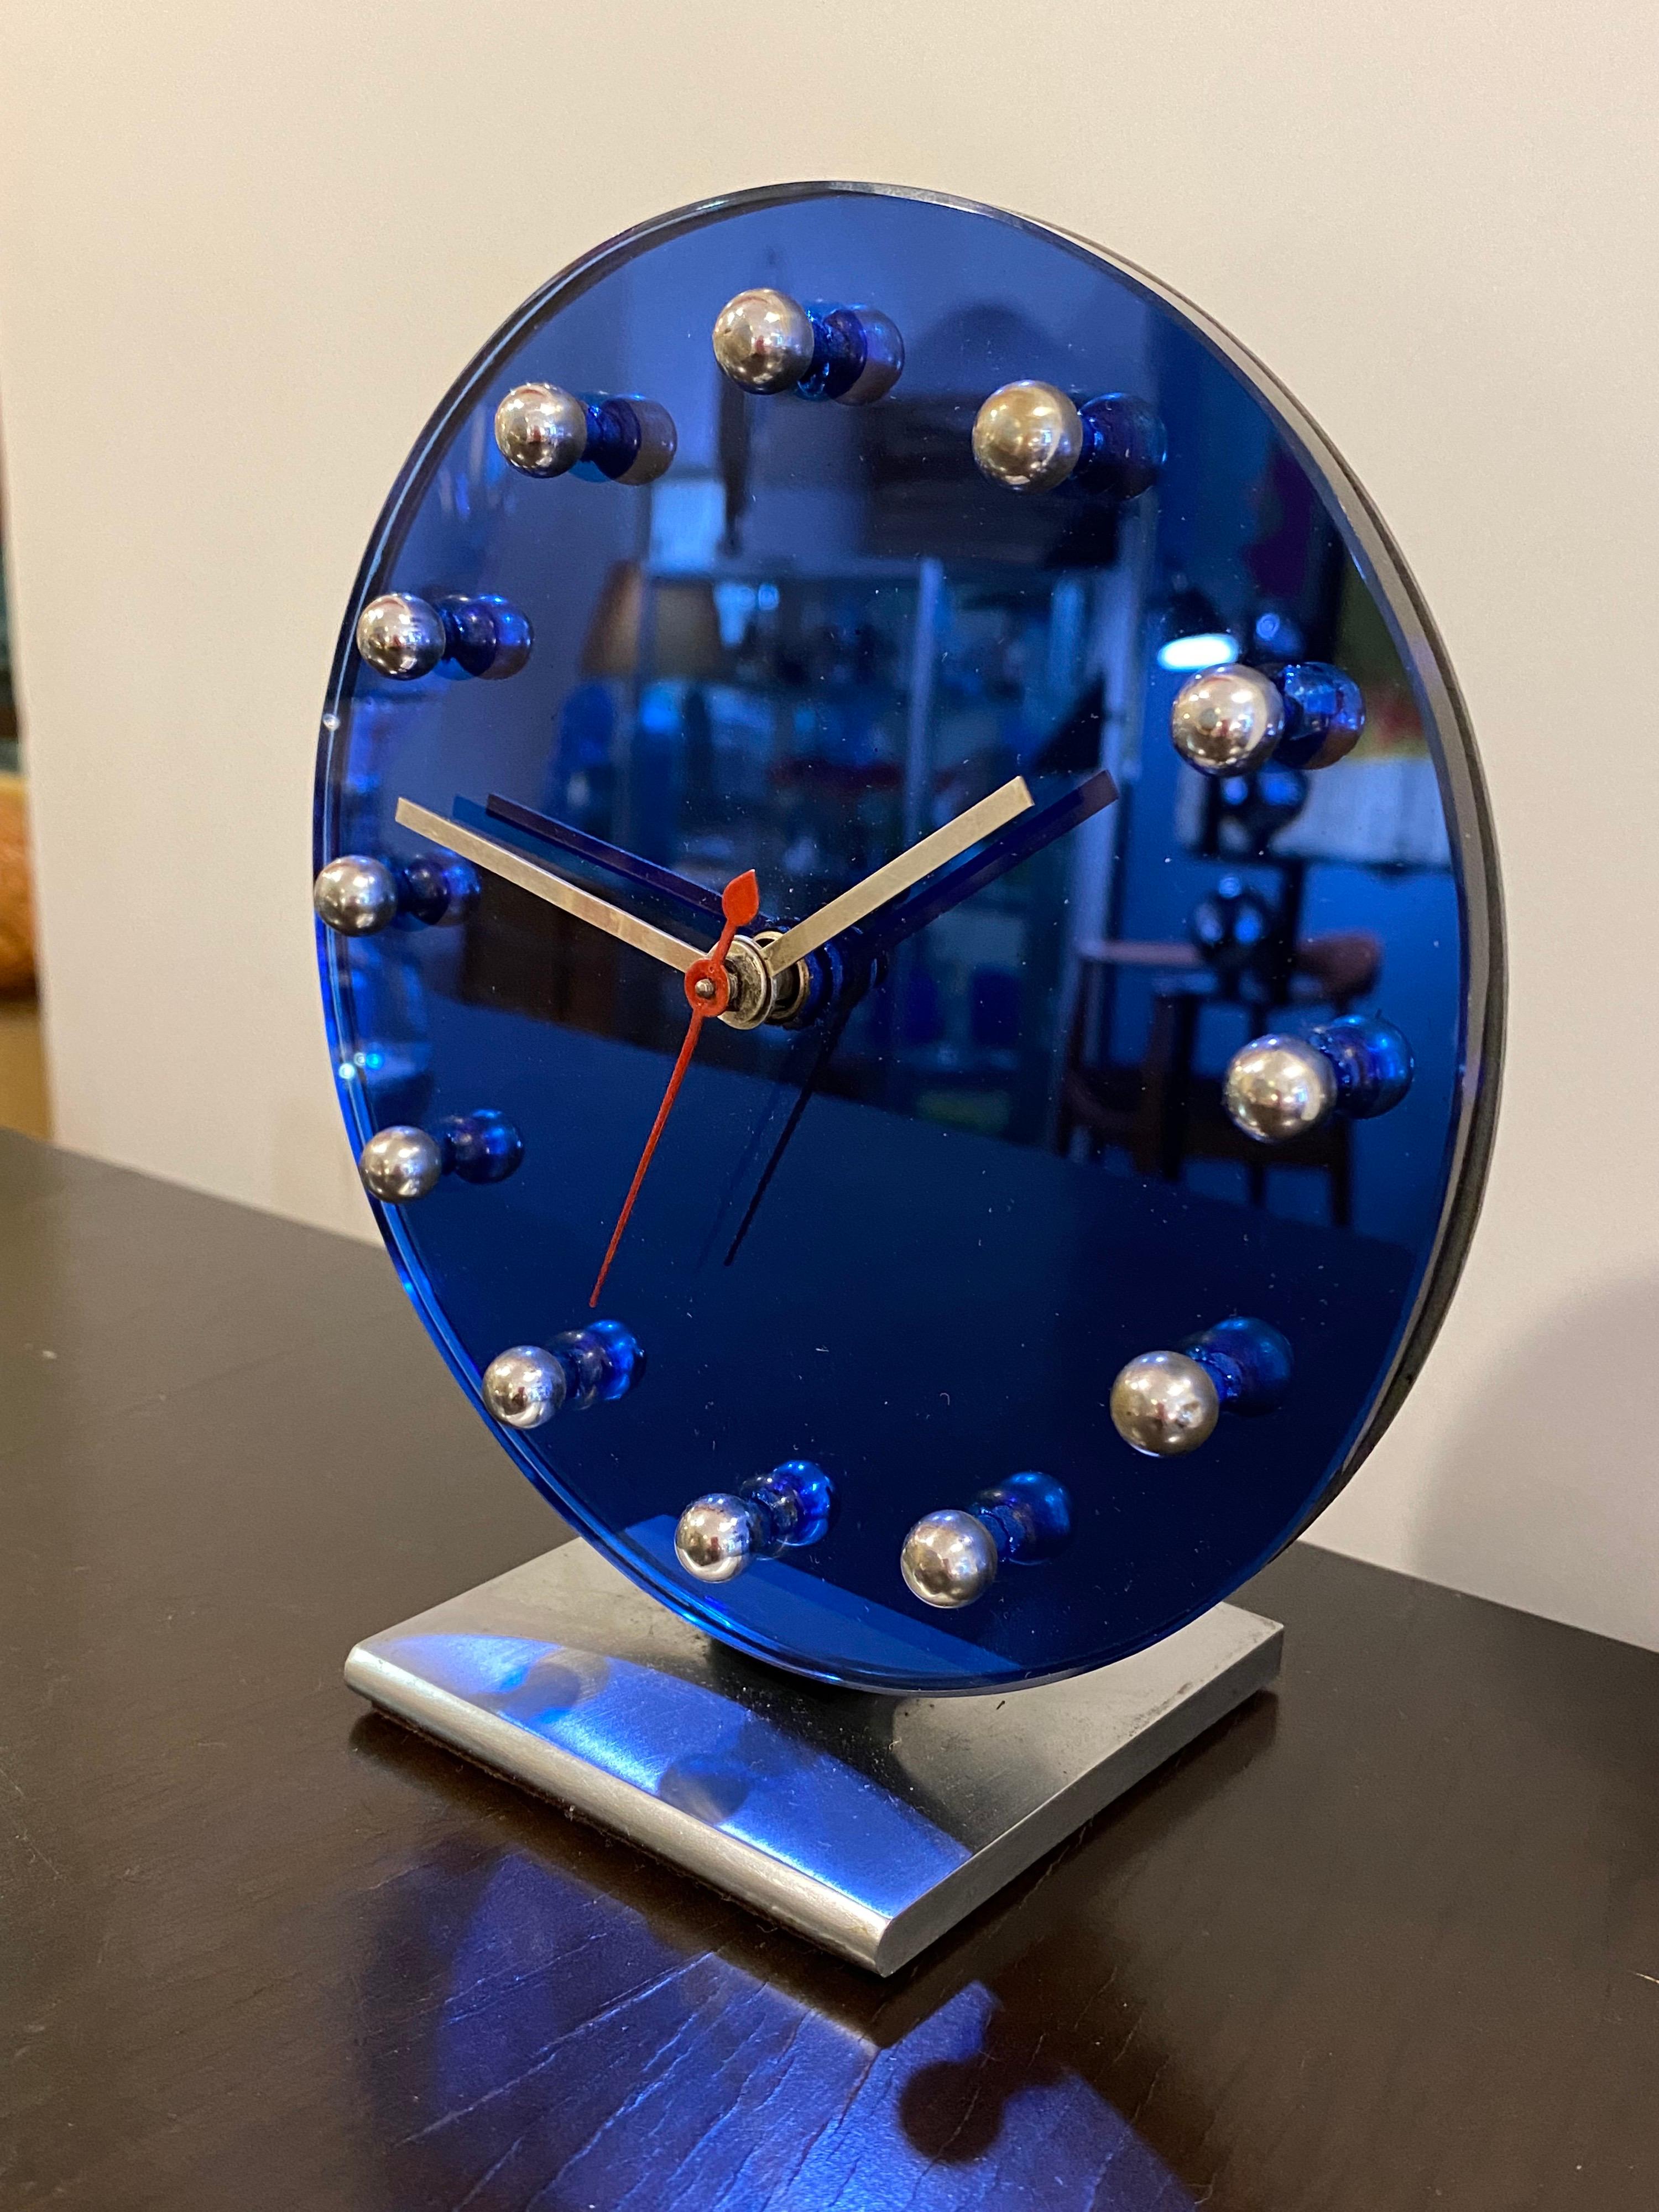 Gilbert Rohde for Herman Miller blue mirror table clock. Rohde introduced a series of clocks in the early 30's that are some of the most amazing designs out there! This example simplifies a clock down to its most basic elements. One of the most